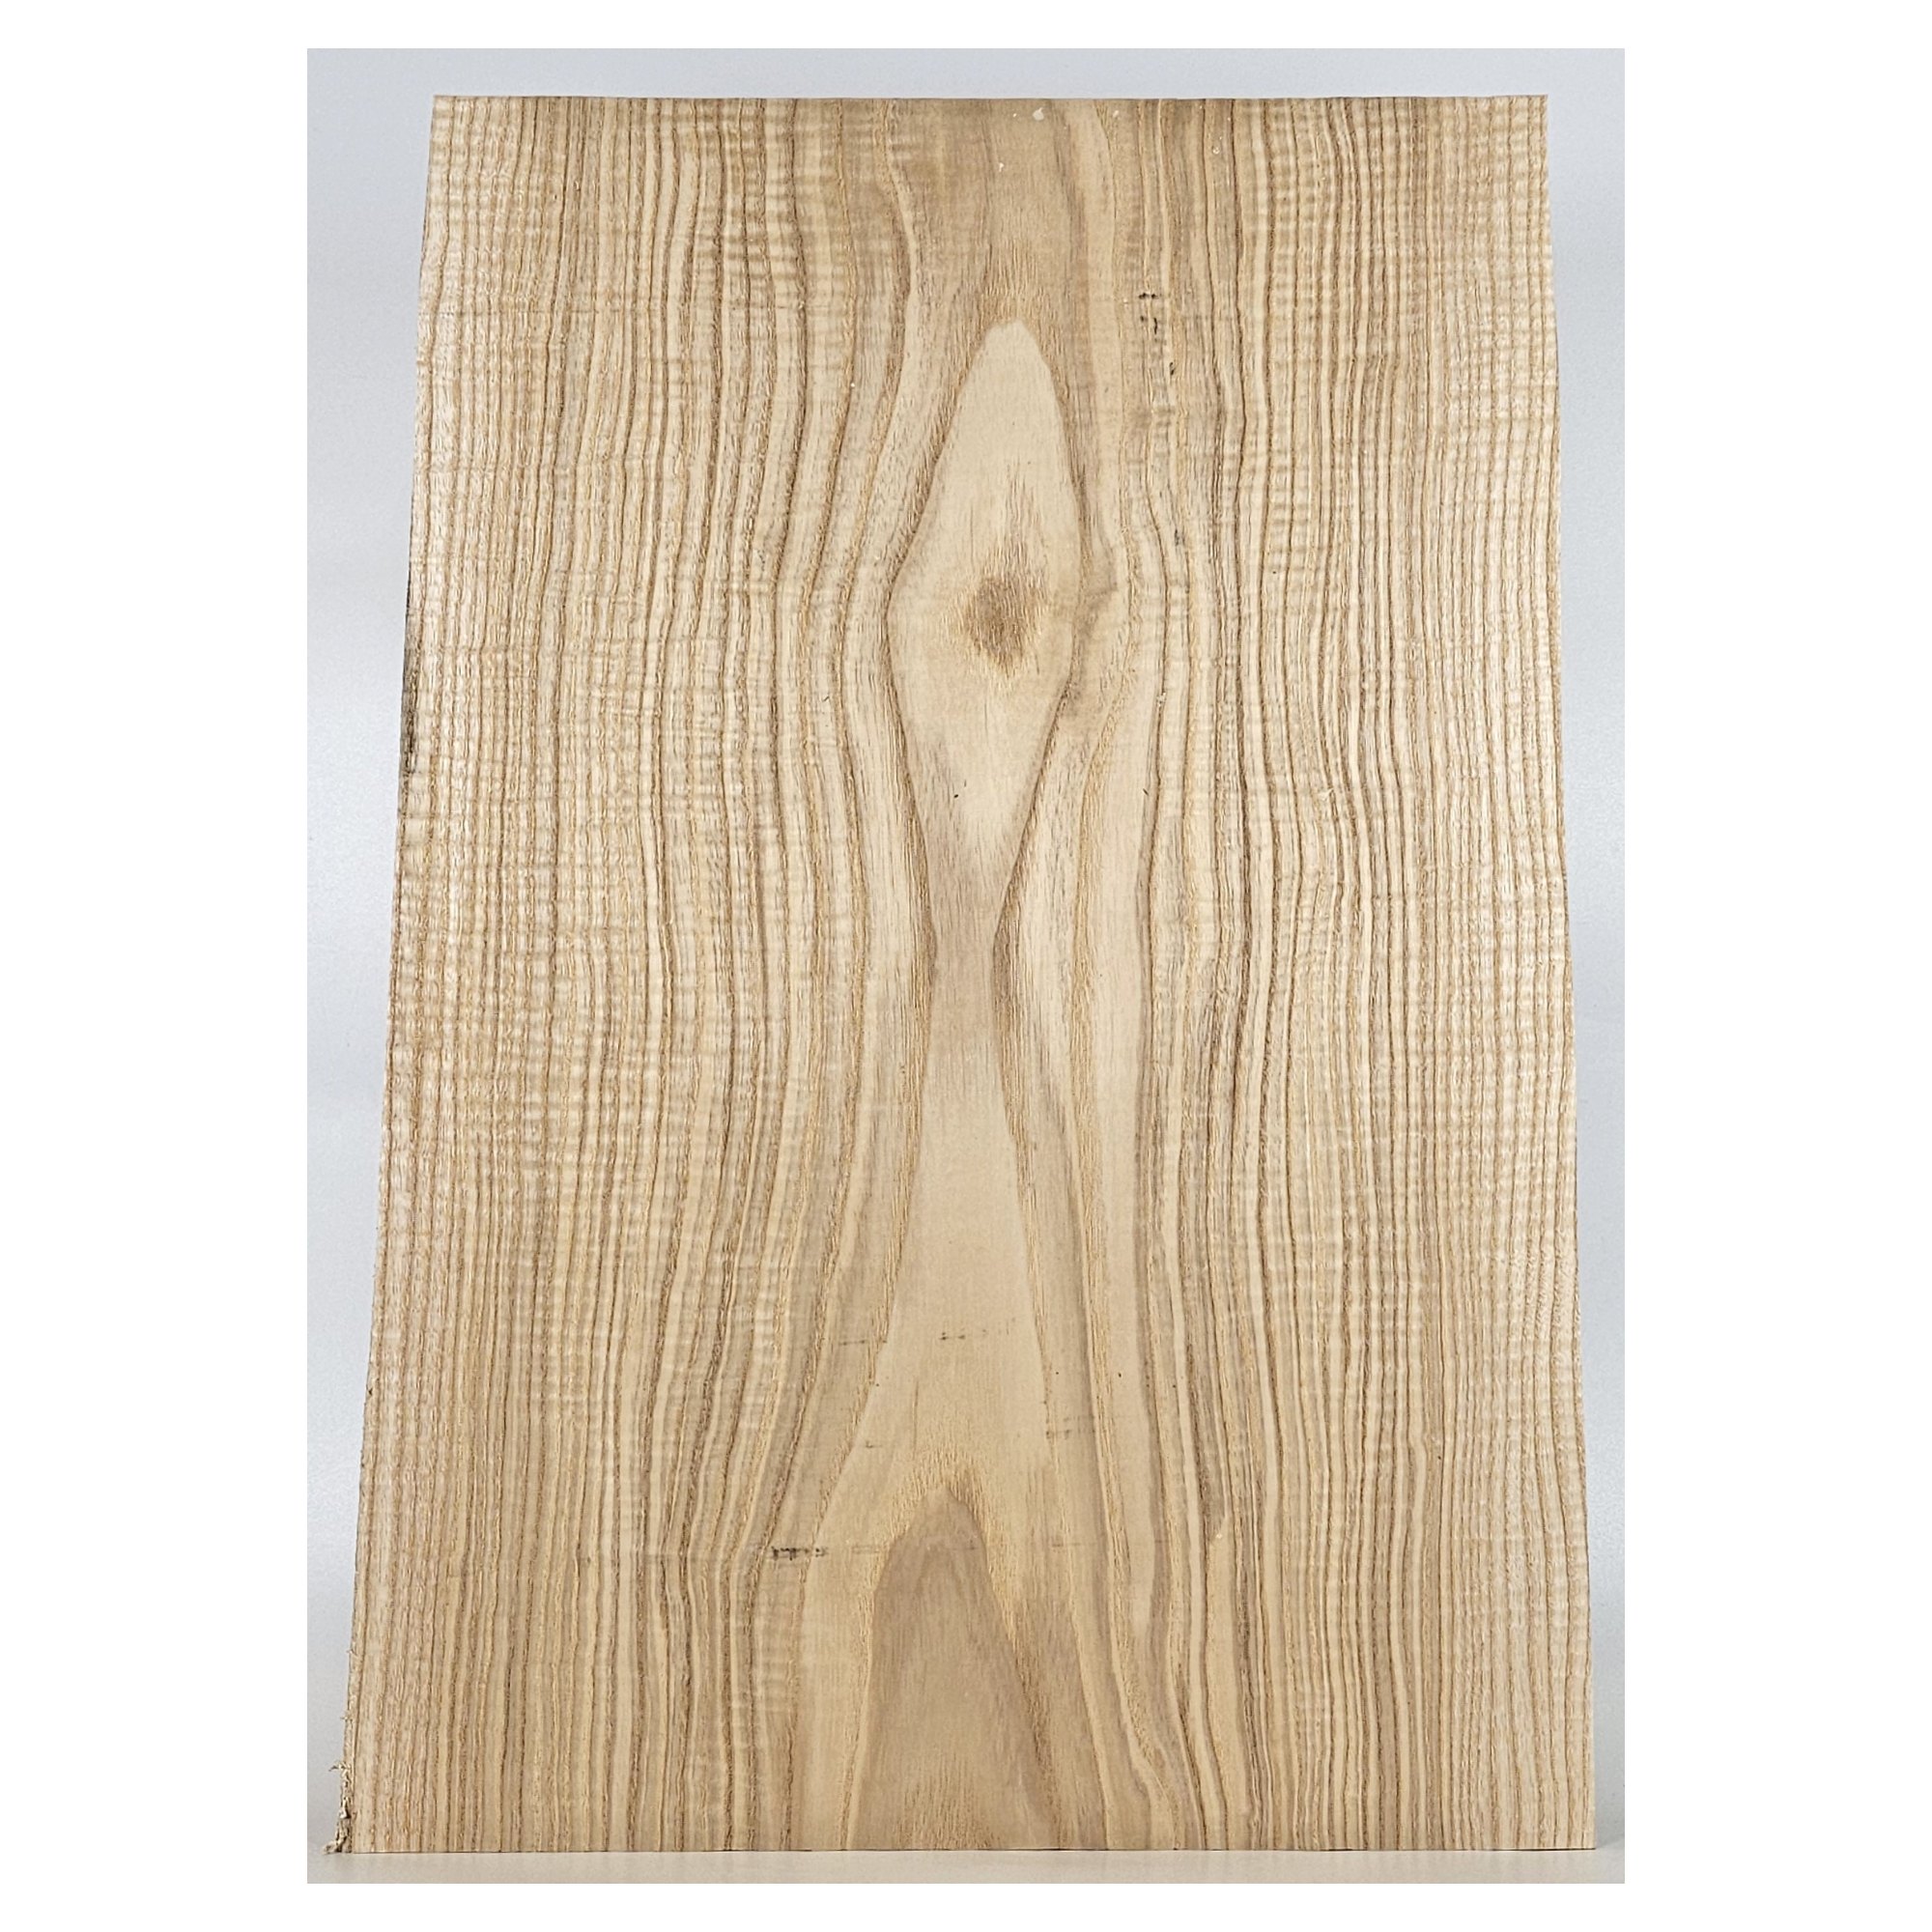 Large French ash billet/small slab. 5A well-quartered curl throughout, heavy grain lines and fairly uniform light color.